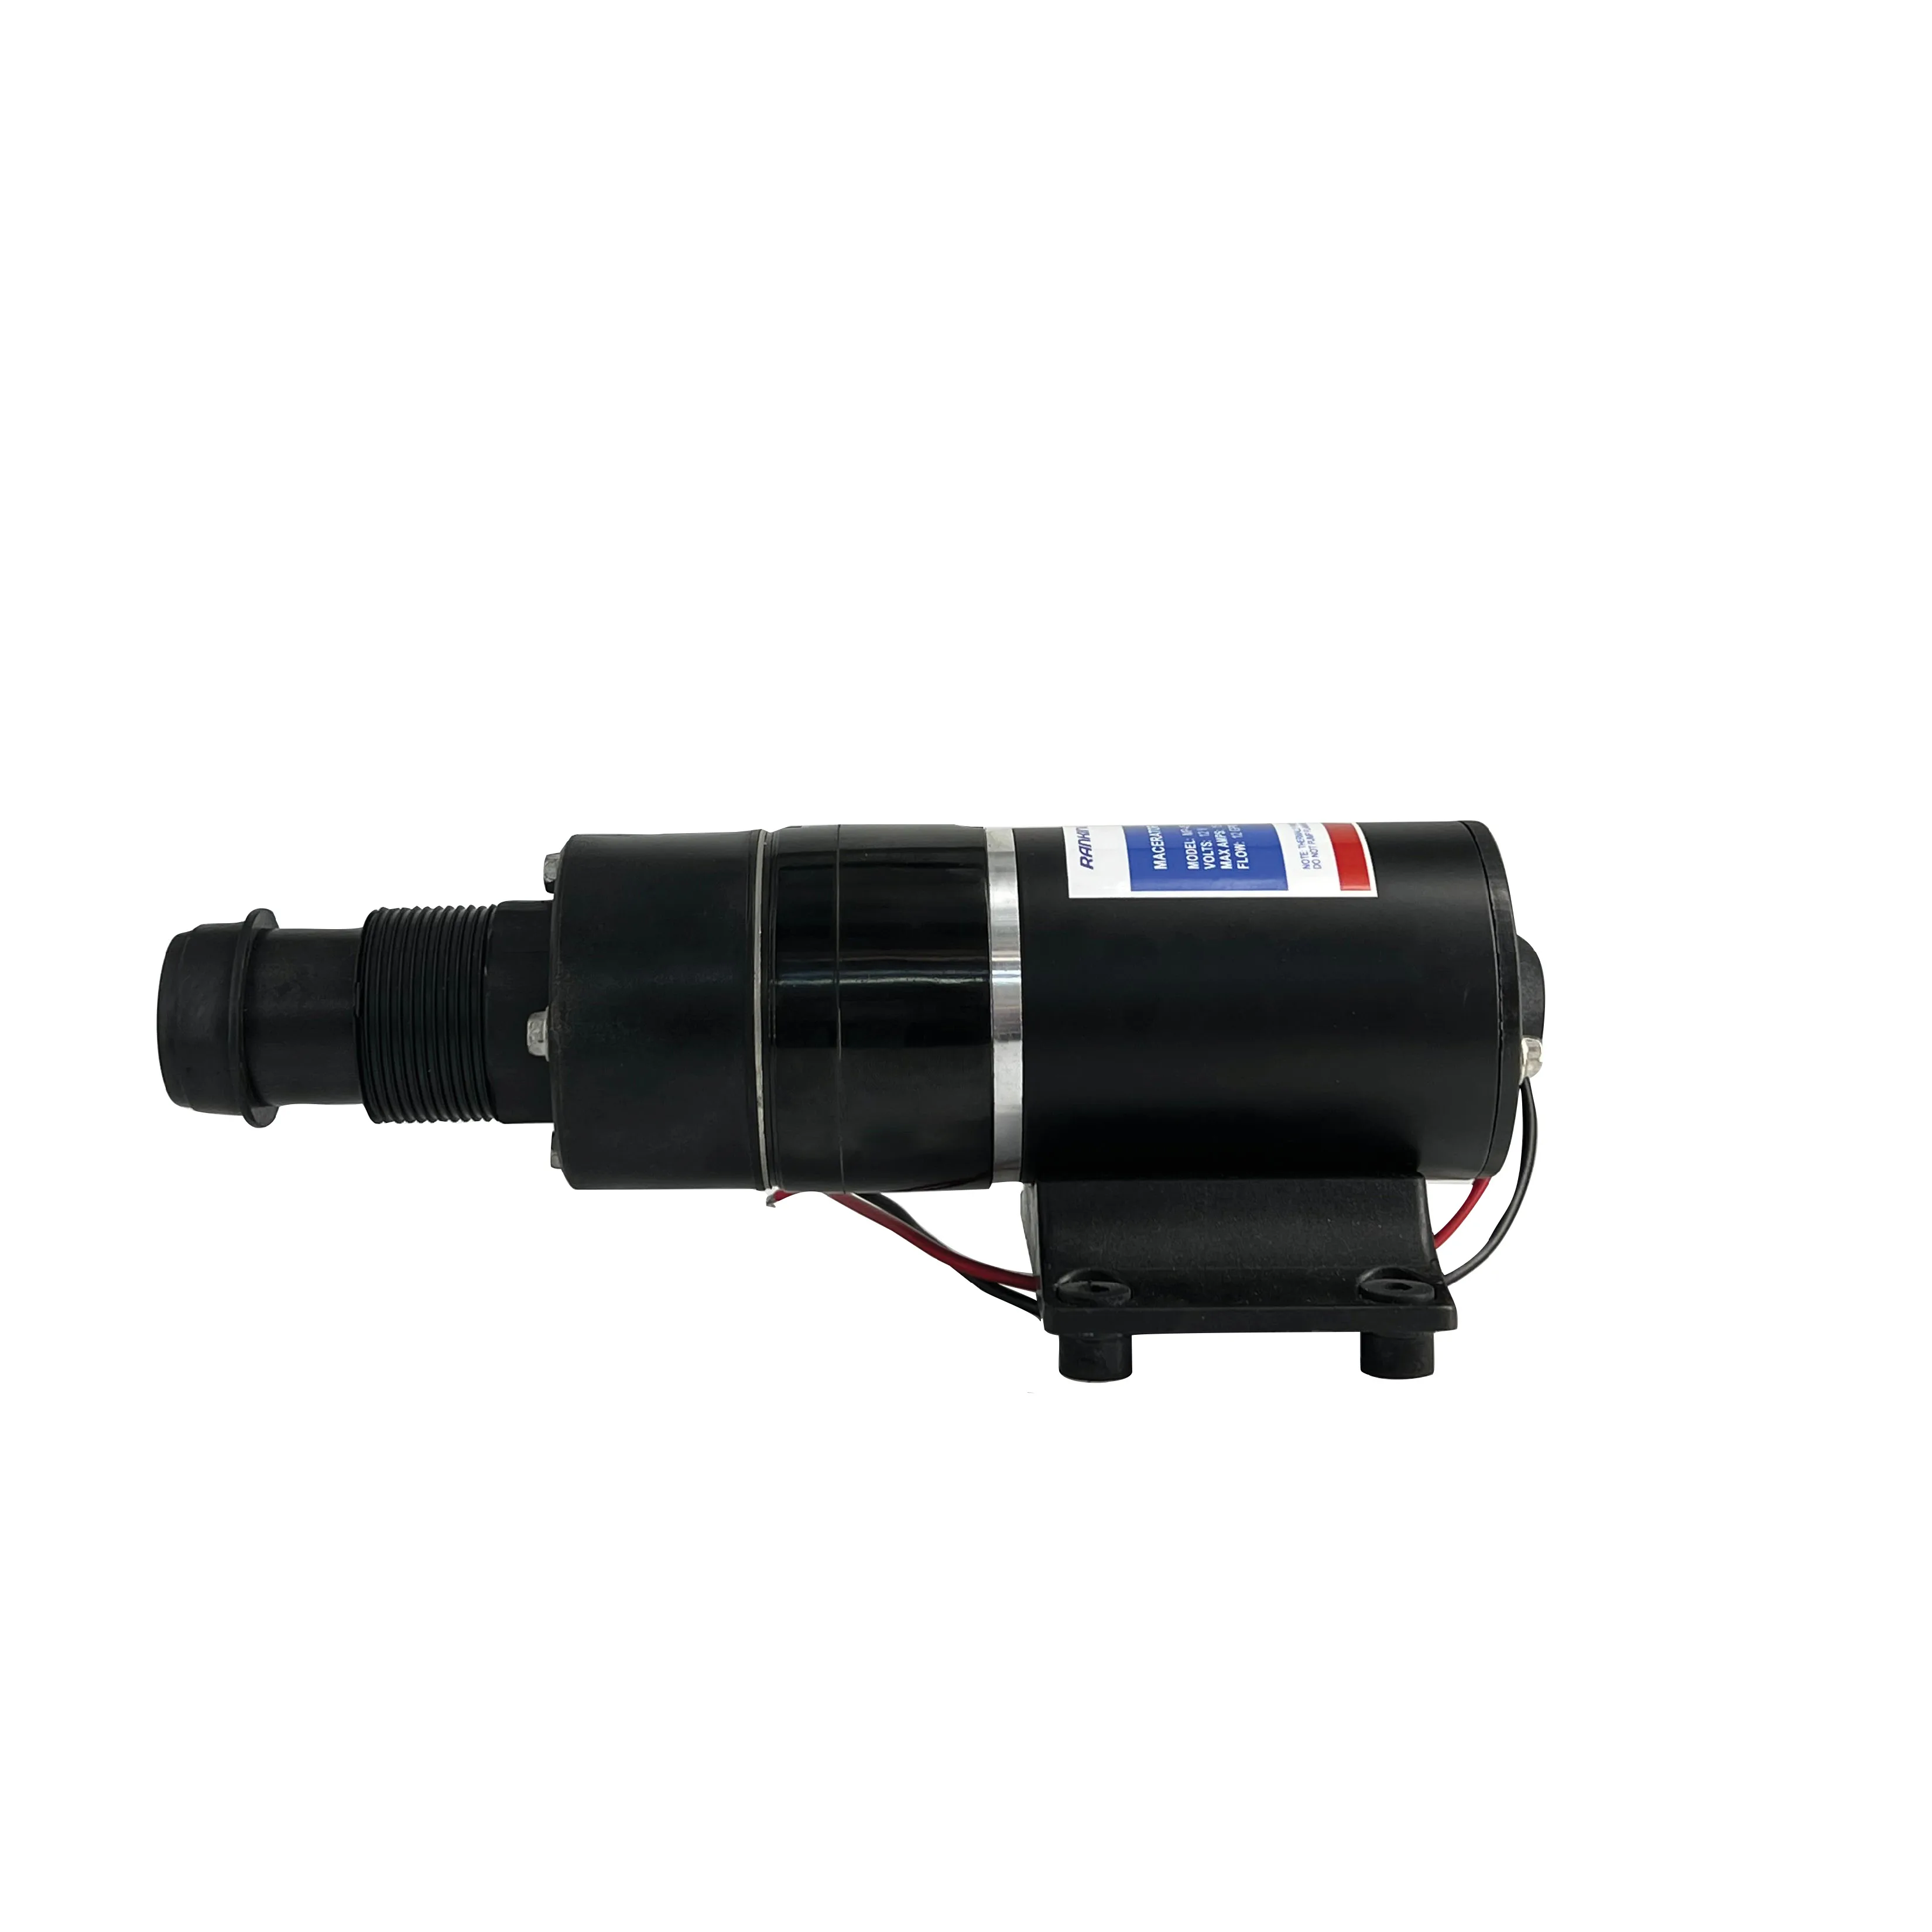 

RANKING 12V DC RV Macerator pump for Trailer Waste Water Dumping Portable and Quick Release Waste Pump for Marine/RV/Camper